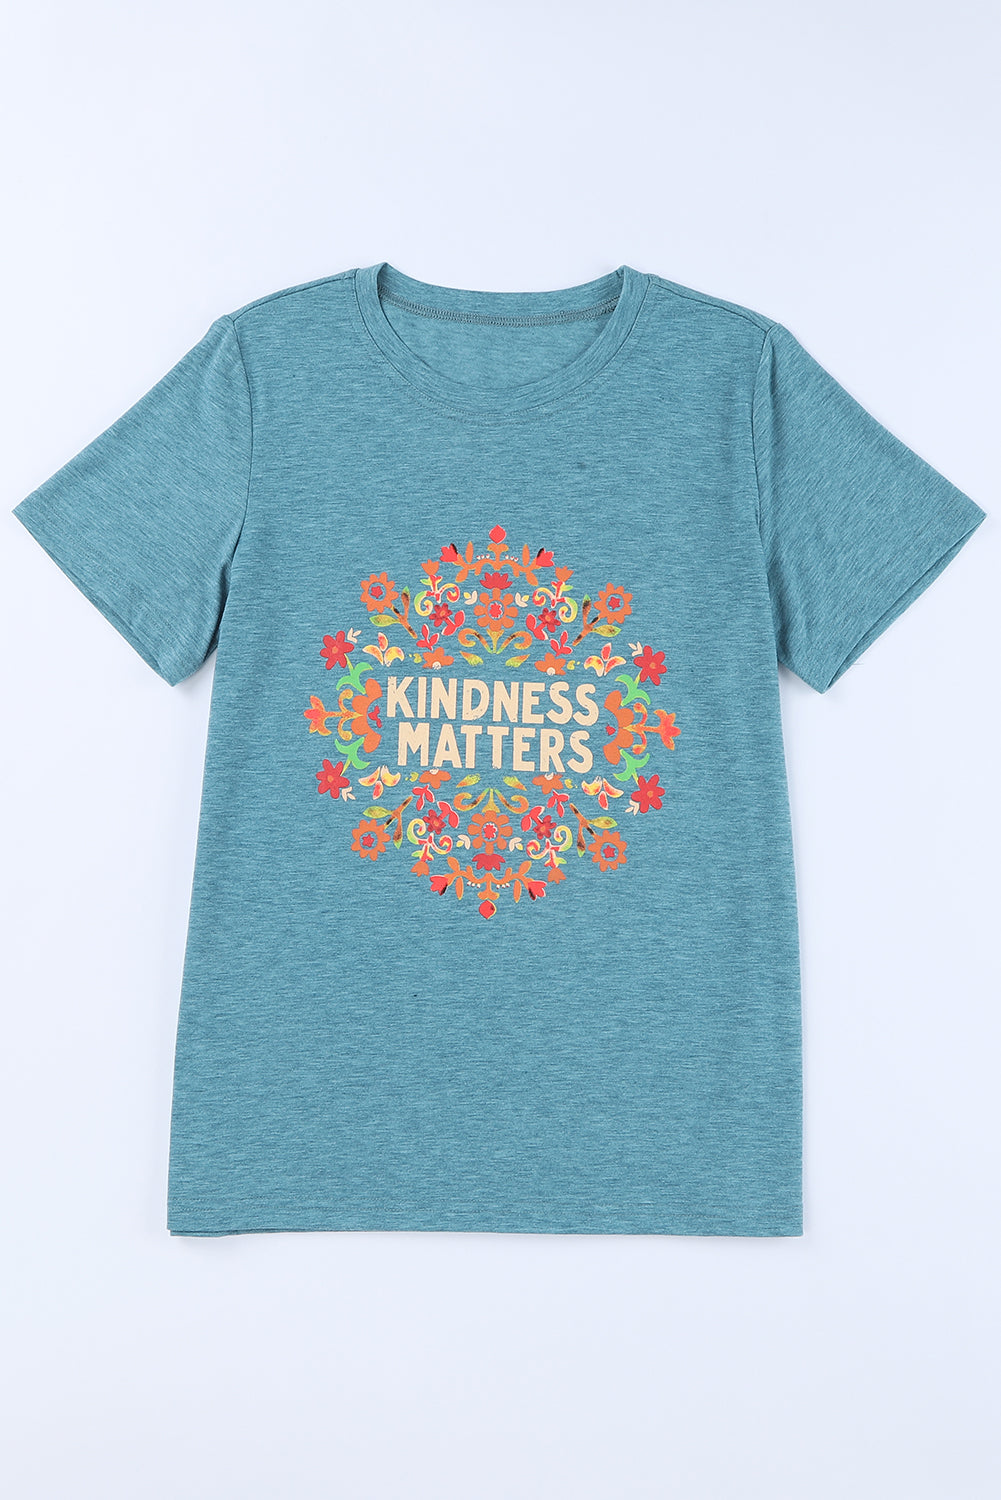 KINDNESS MATTERS Flower Graphic Tee - Kawaii Stop - Casual Style, Comfortable Fit, Easy Care, Fashionable Statement, Flower Design, Graphic Tee, Kindness Matters, Positive Vibes, Ship From Overseas, Short Sleeves, Spread Kindness, SYNZ, T-Shirt, T-Shirts, Tee, Women's Clothing, Women's Top